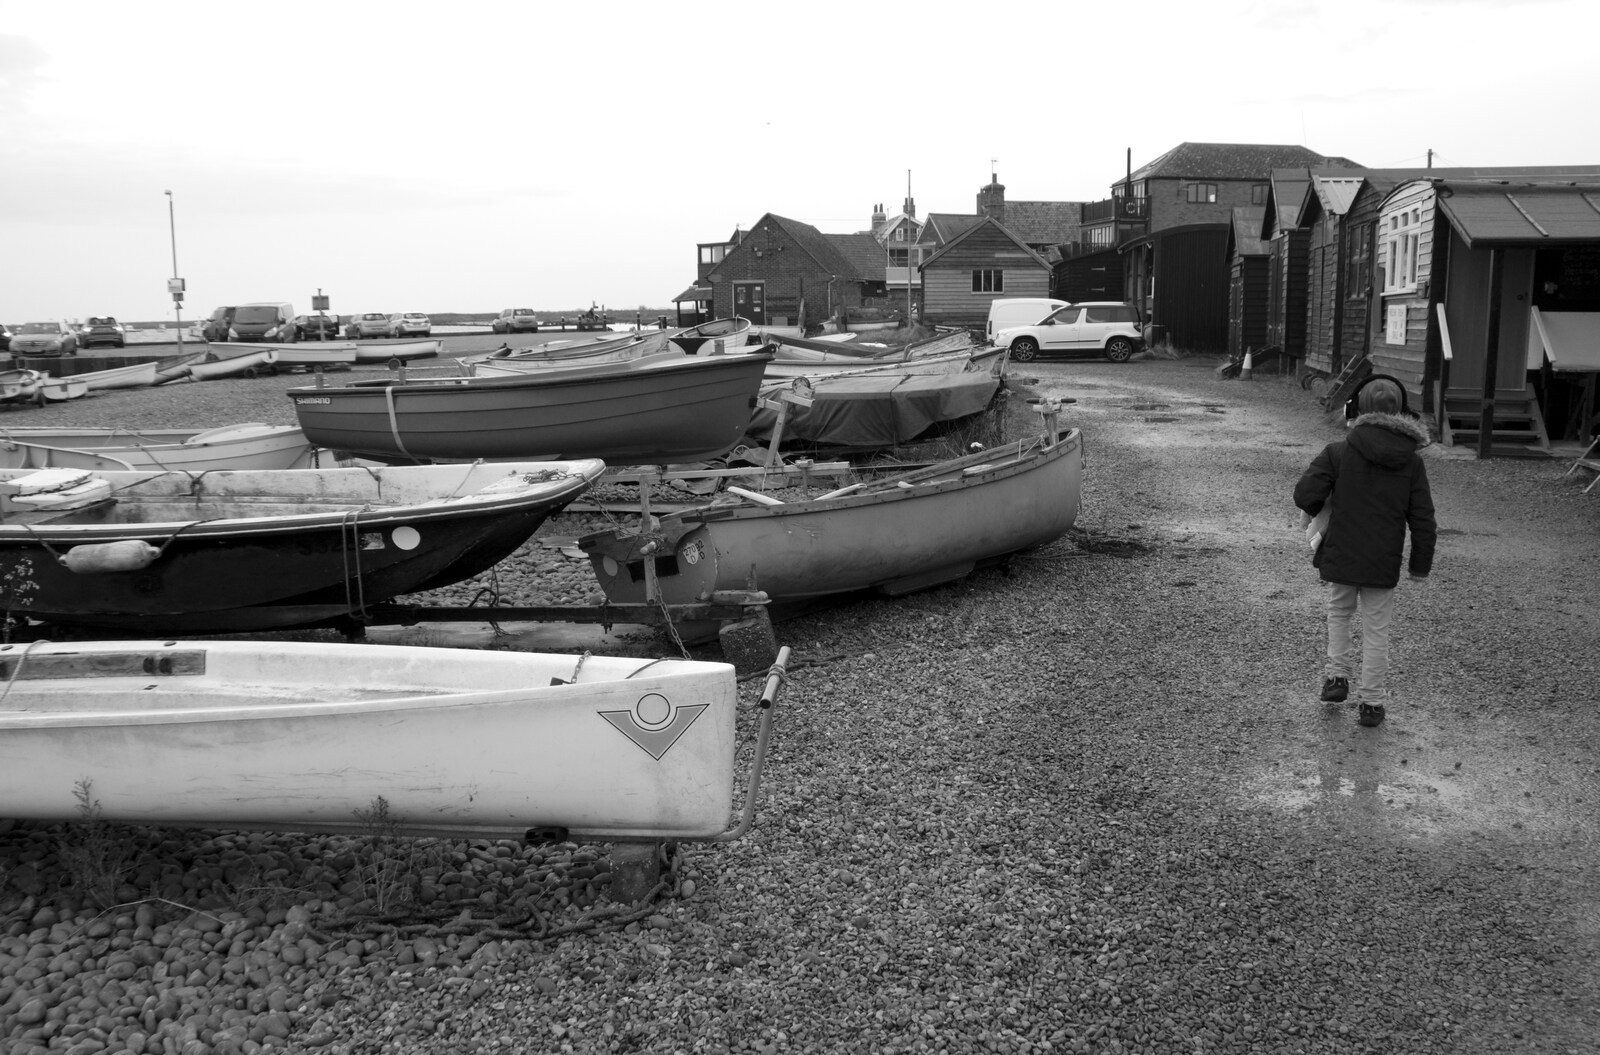 A Trip to Orford, Suffolk - 25th January 2020: Harry roams around